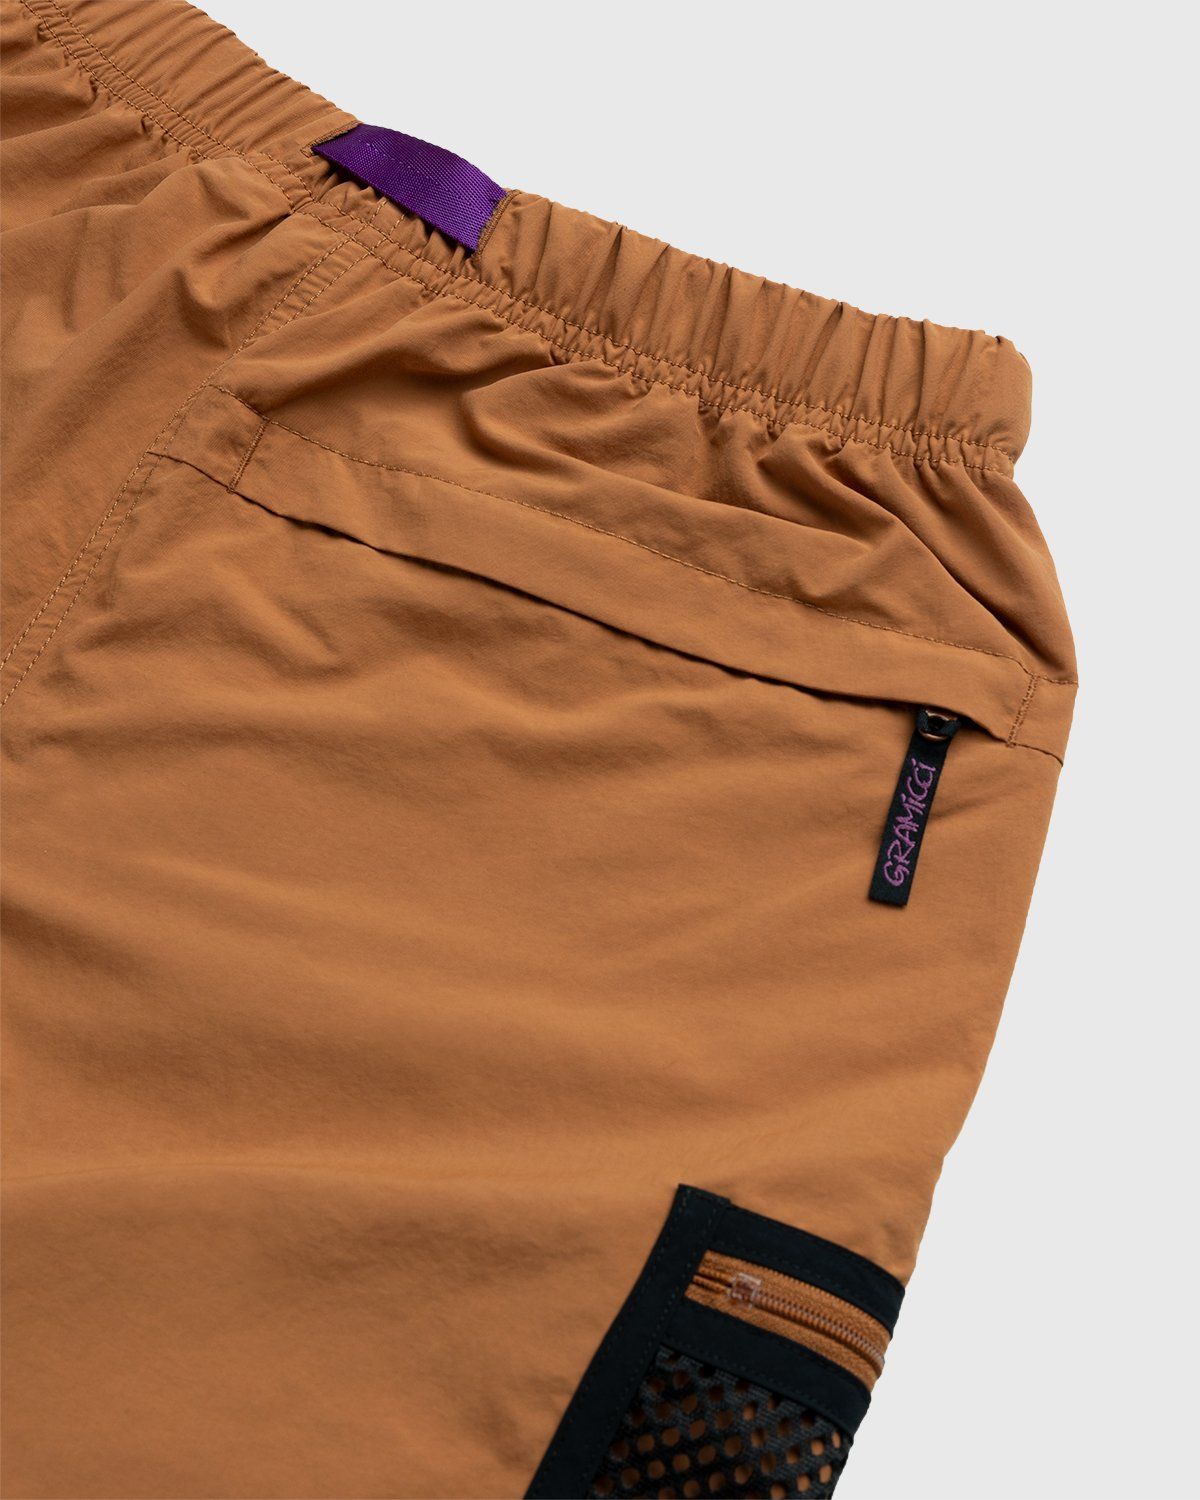 Gramicci x Highsnobiety – Shorts Rust - Active Shorts - Brown - Image 6